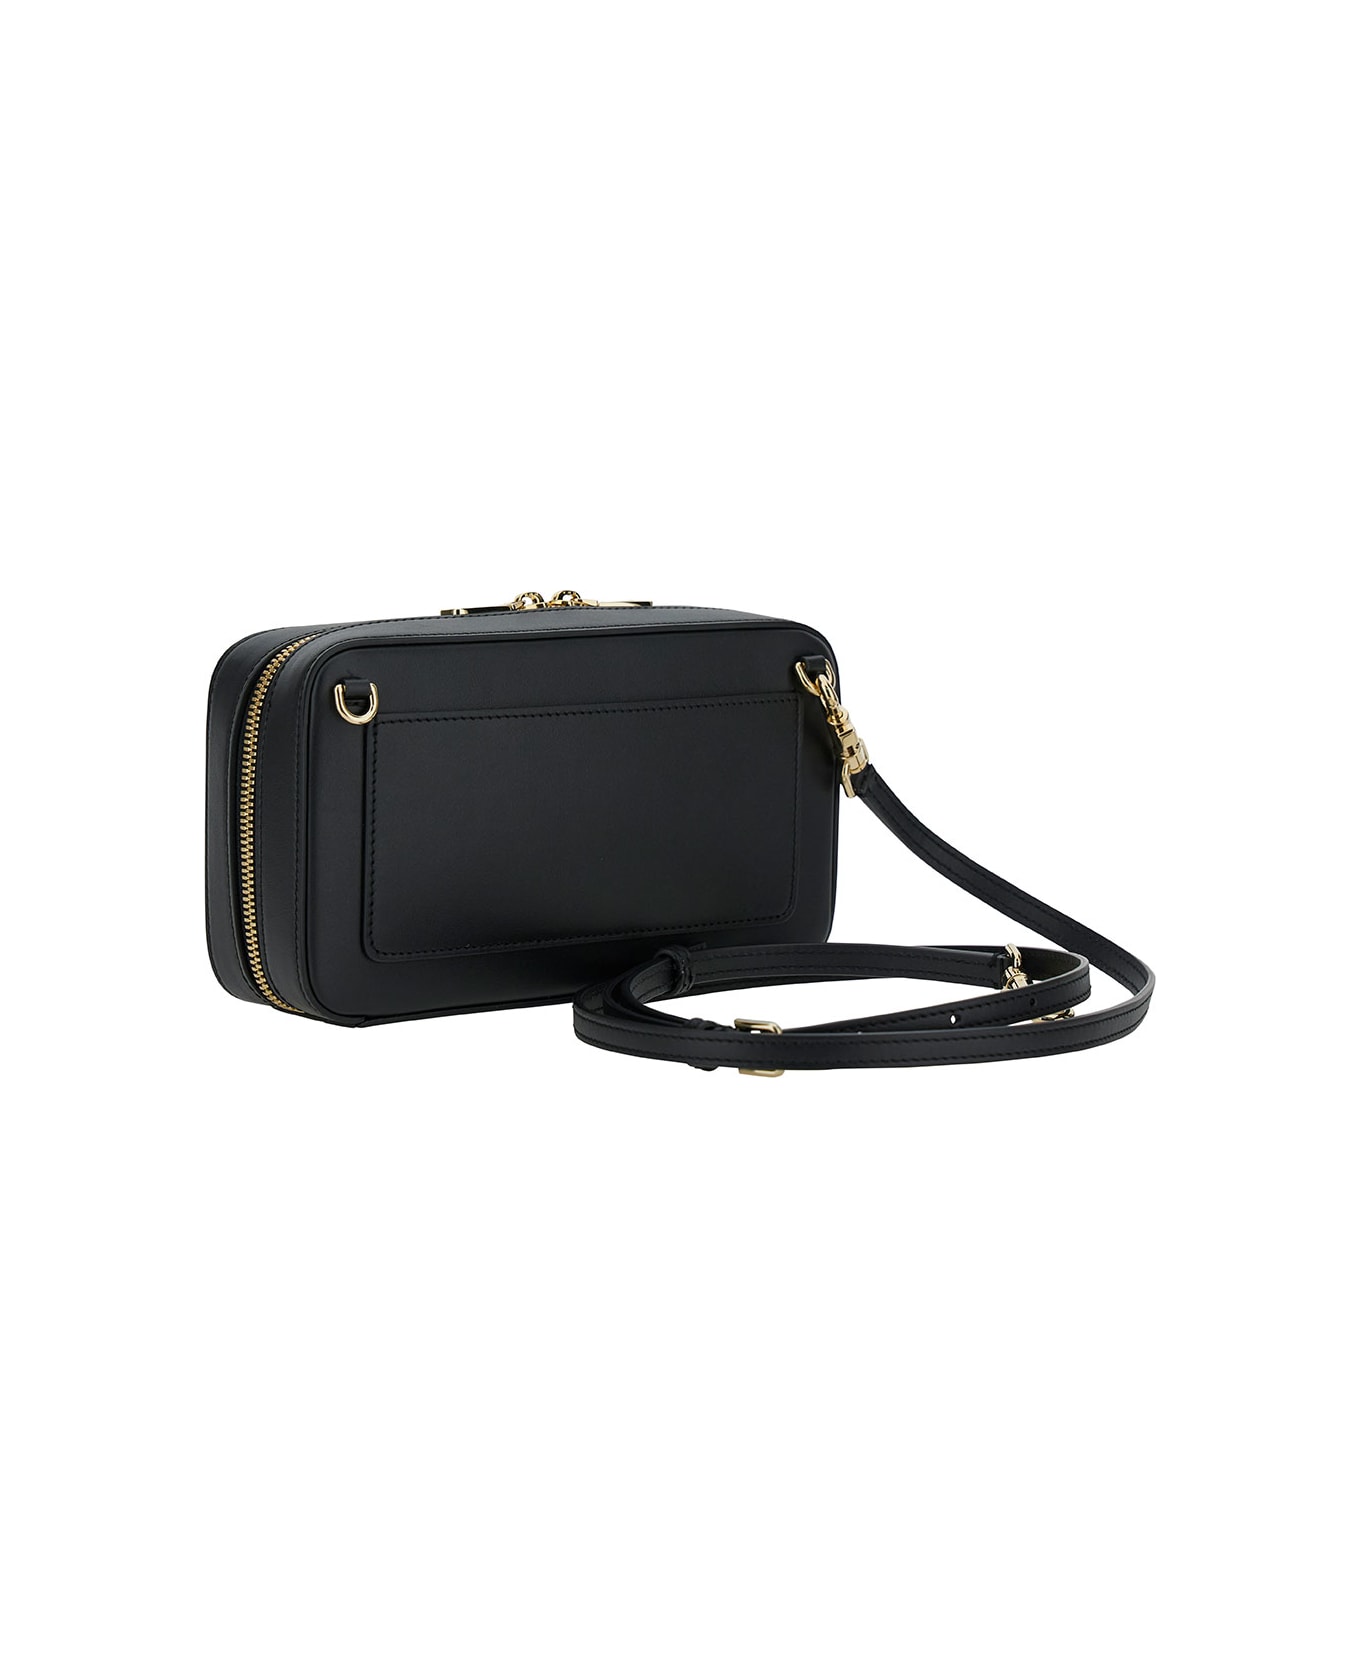 Dolce & Gabbana Black Crossbody Bag With Quilted Dg Logo In Leather Woman - Black